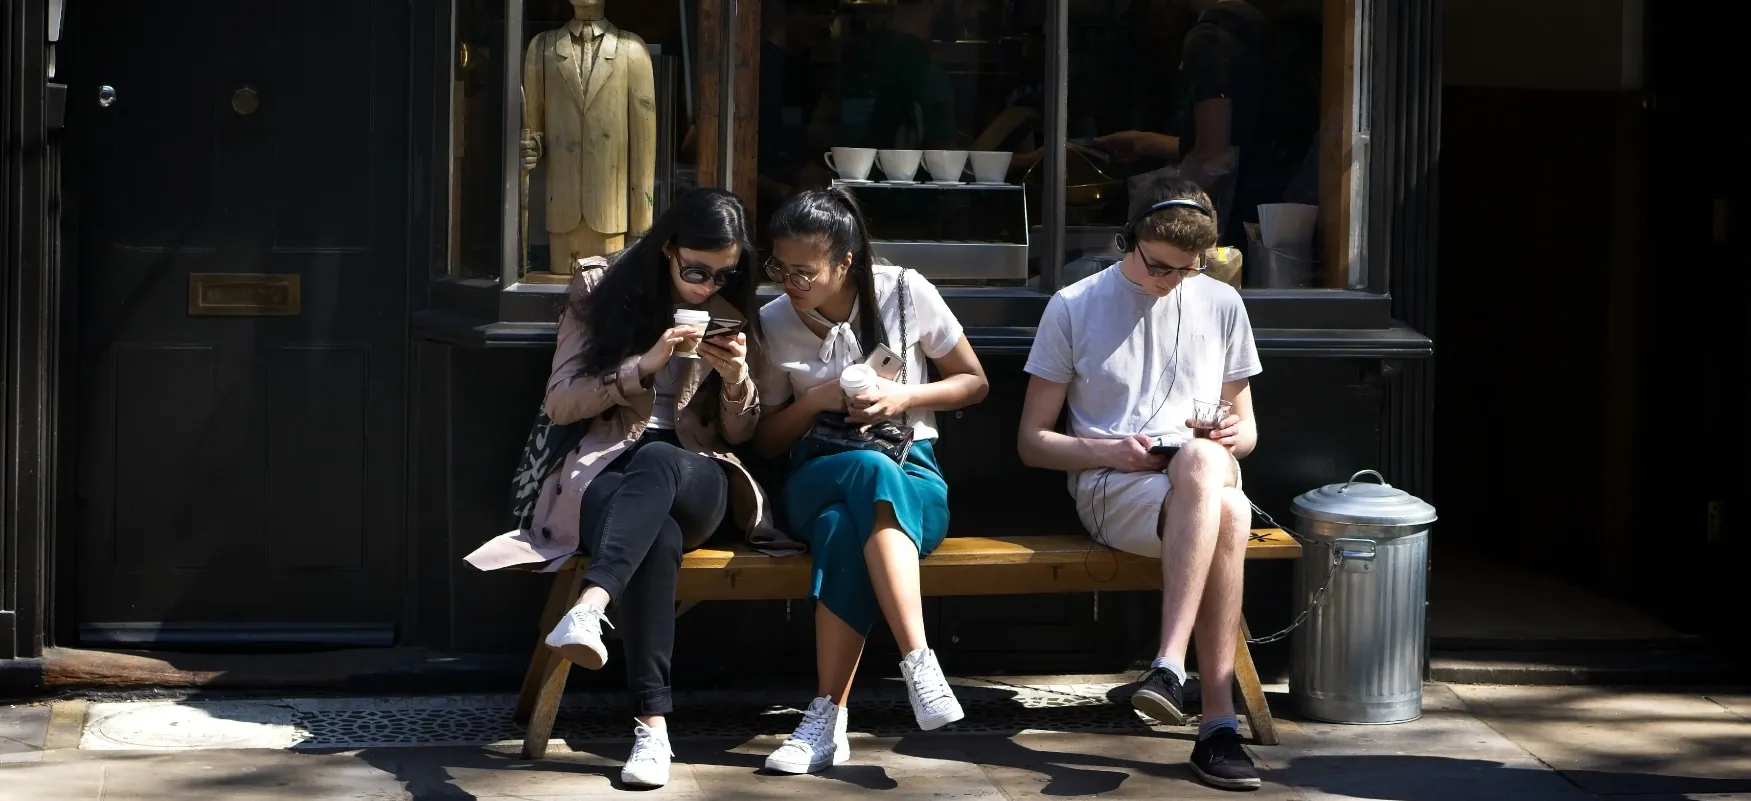 Three people sit on a bench using their mobile devices. Two look at the same device while the other, wearing headphones, looks down.